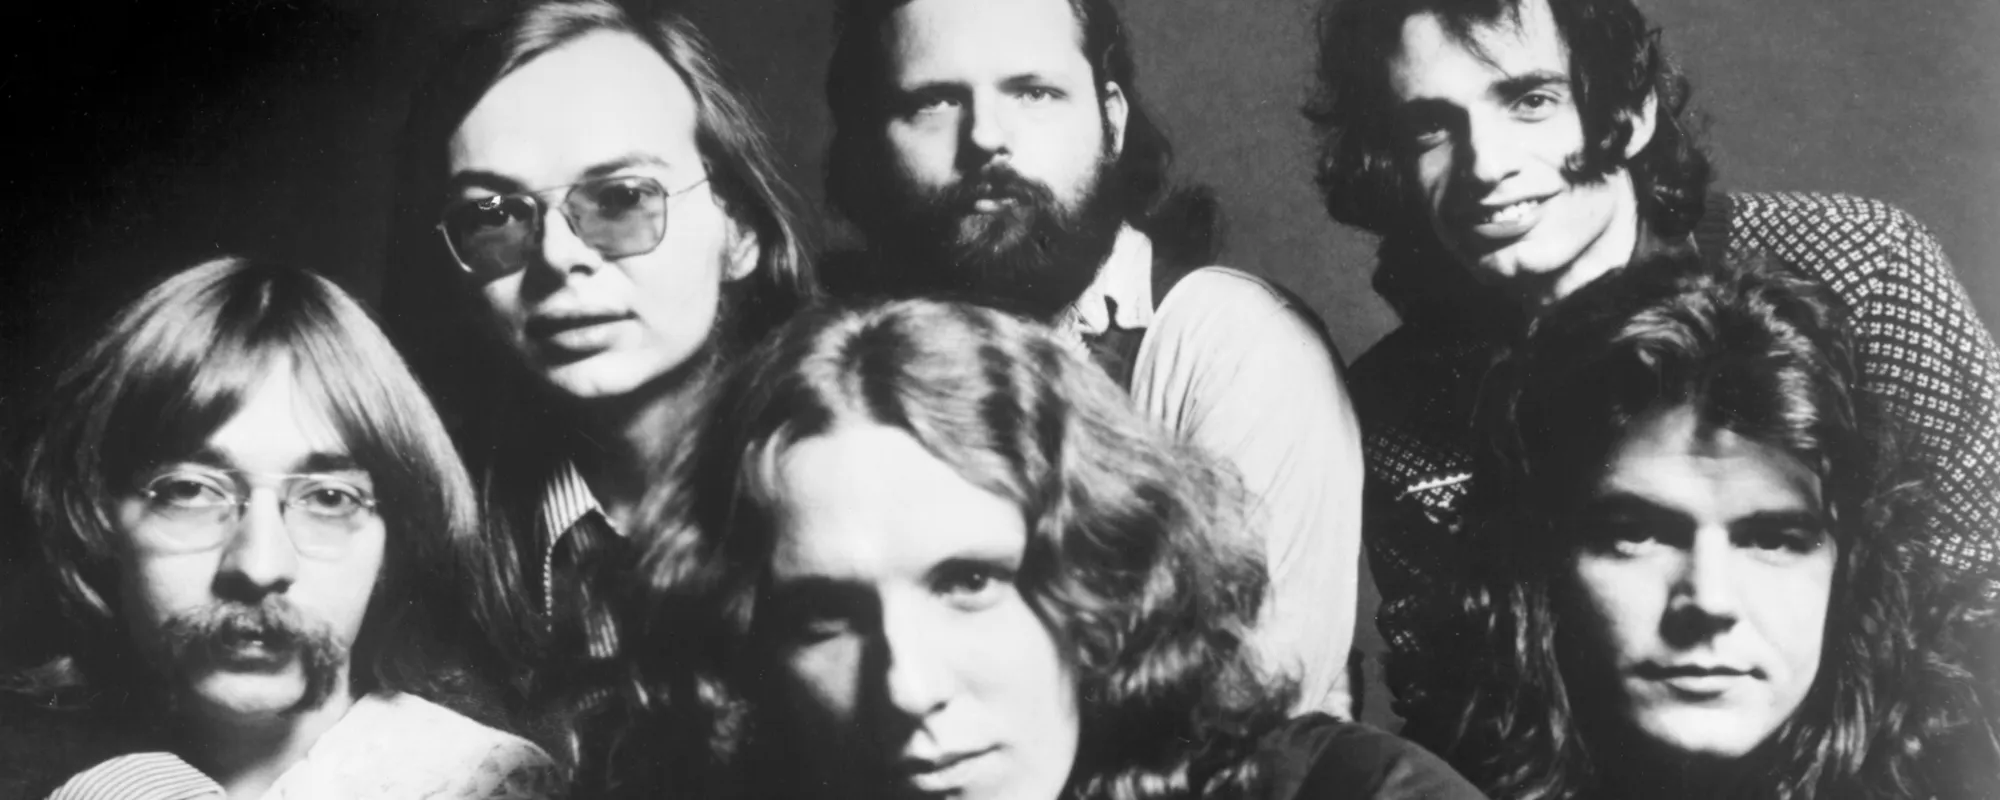 Behind the Song Lyrics: “Rikki Don’t Lose That Number,” Steely Dan